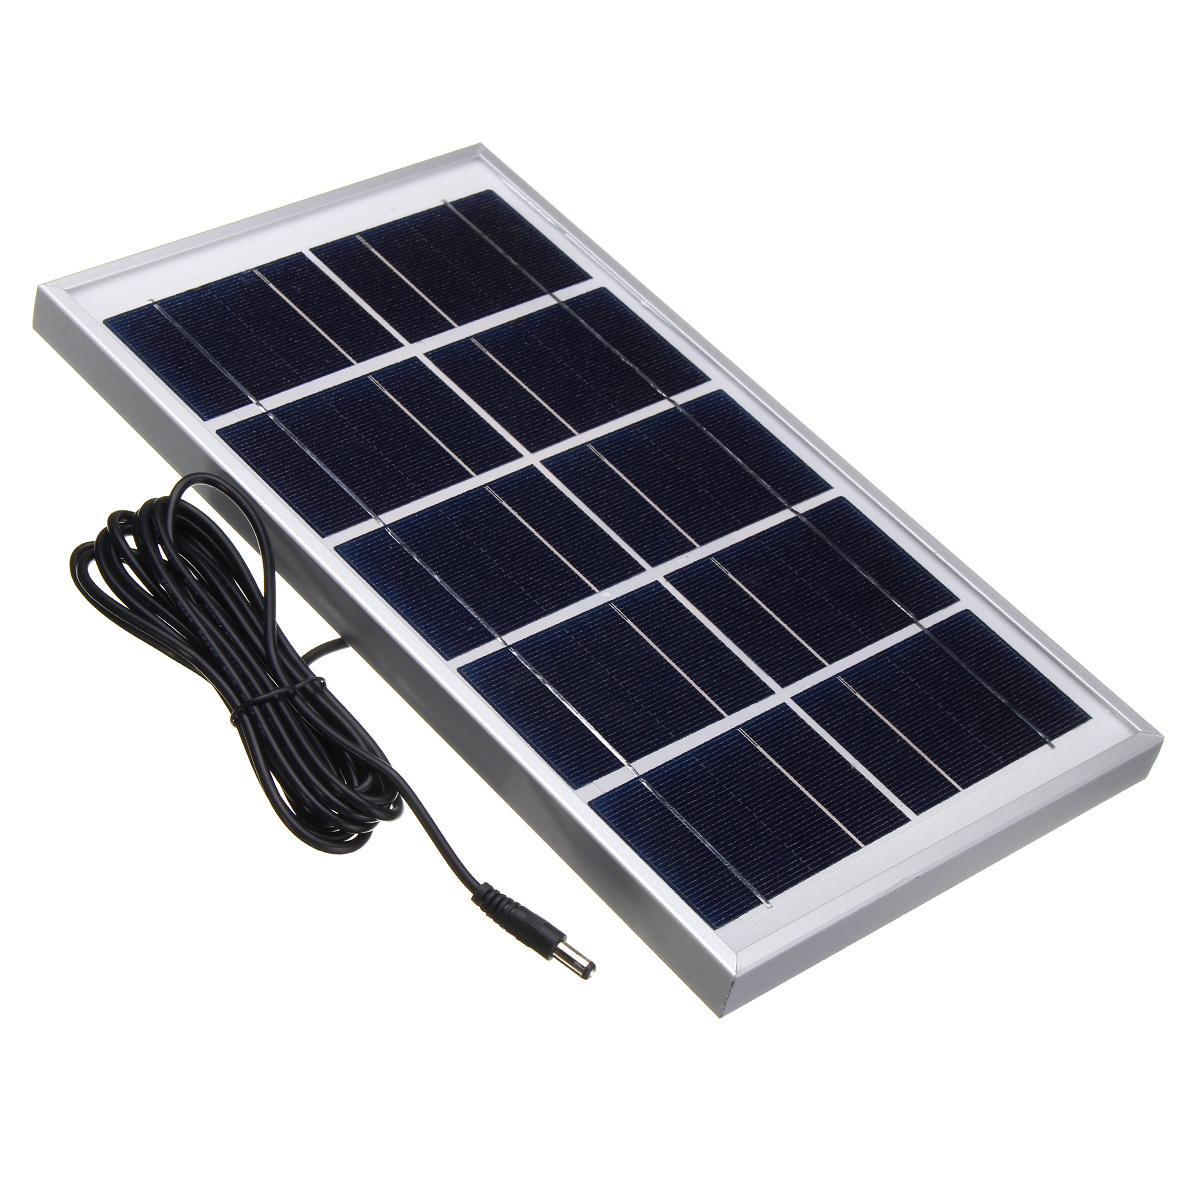 5V 7W Durdable Waterproof Polycrystalline Solar Panel Charger With 3M Cable For Emergency Light 1